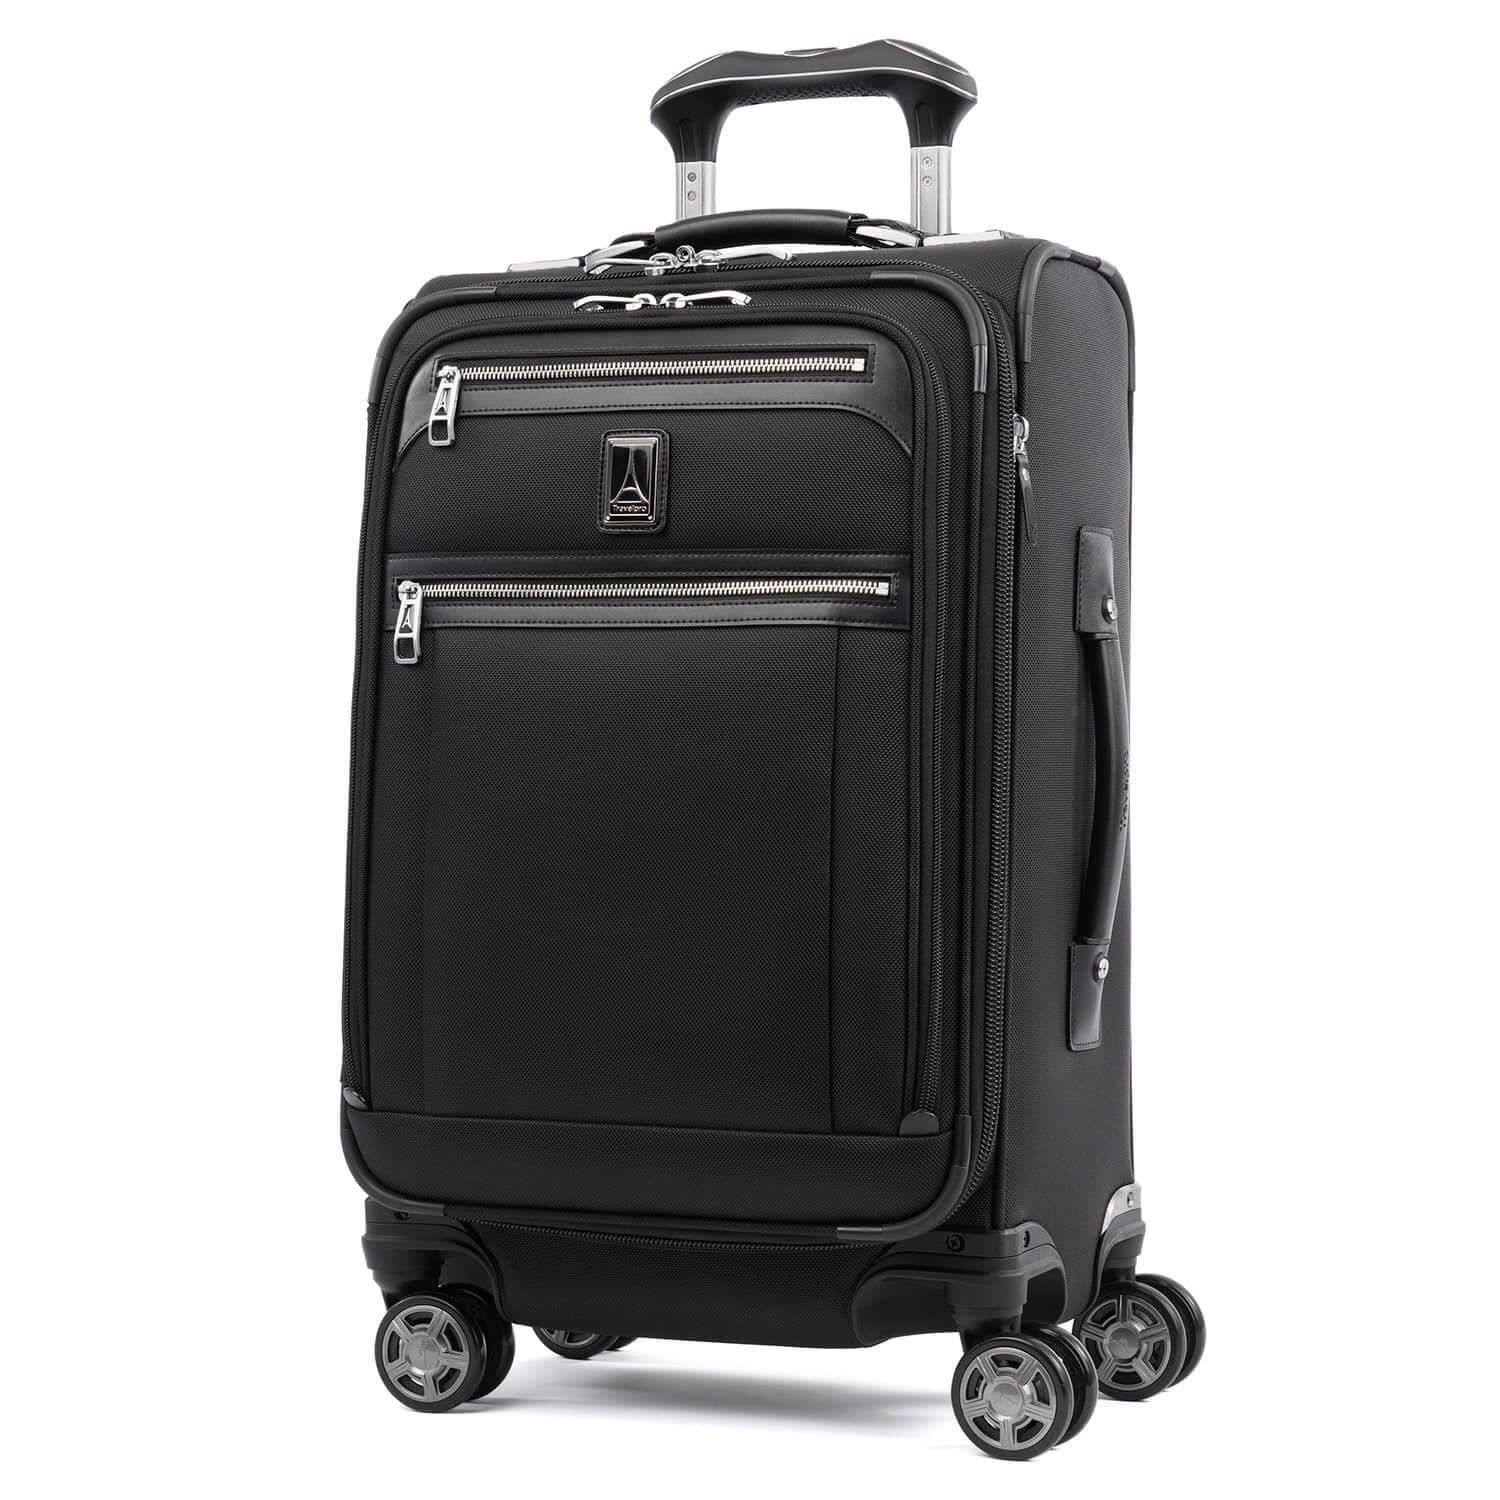 Travelpro Luggage Review for 2023